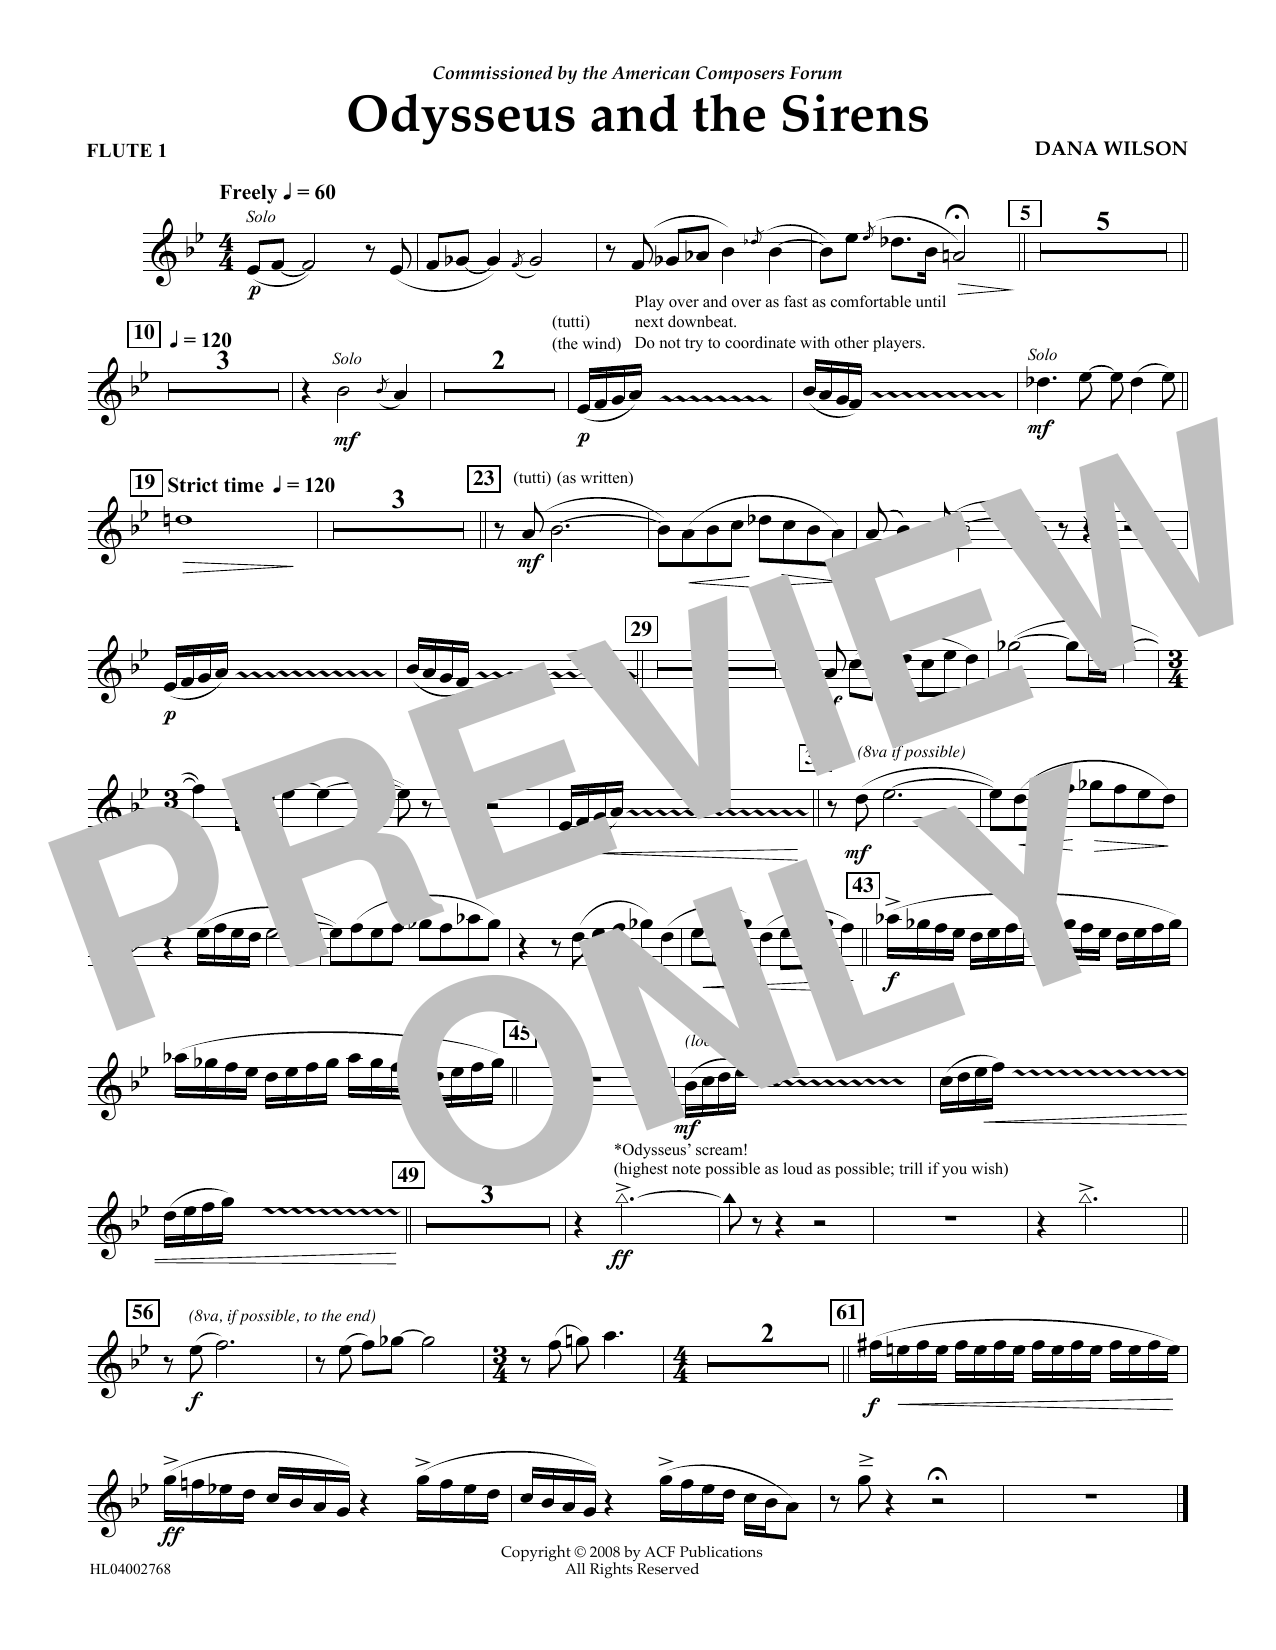 Download Dana Wilson Odysseus and the Sirens - Flute 1 Sheet Music